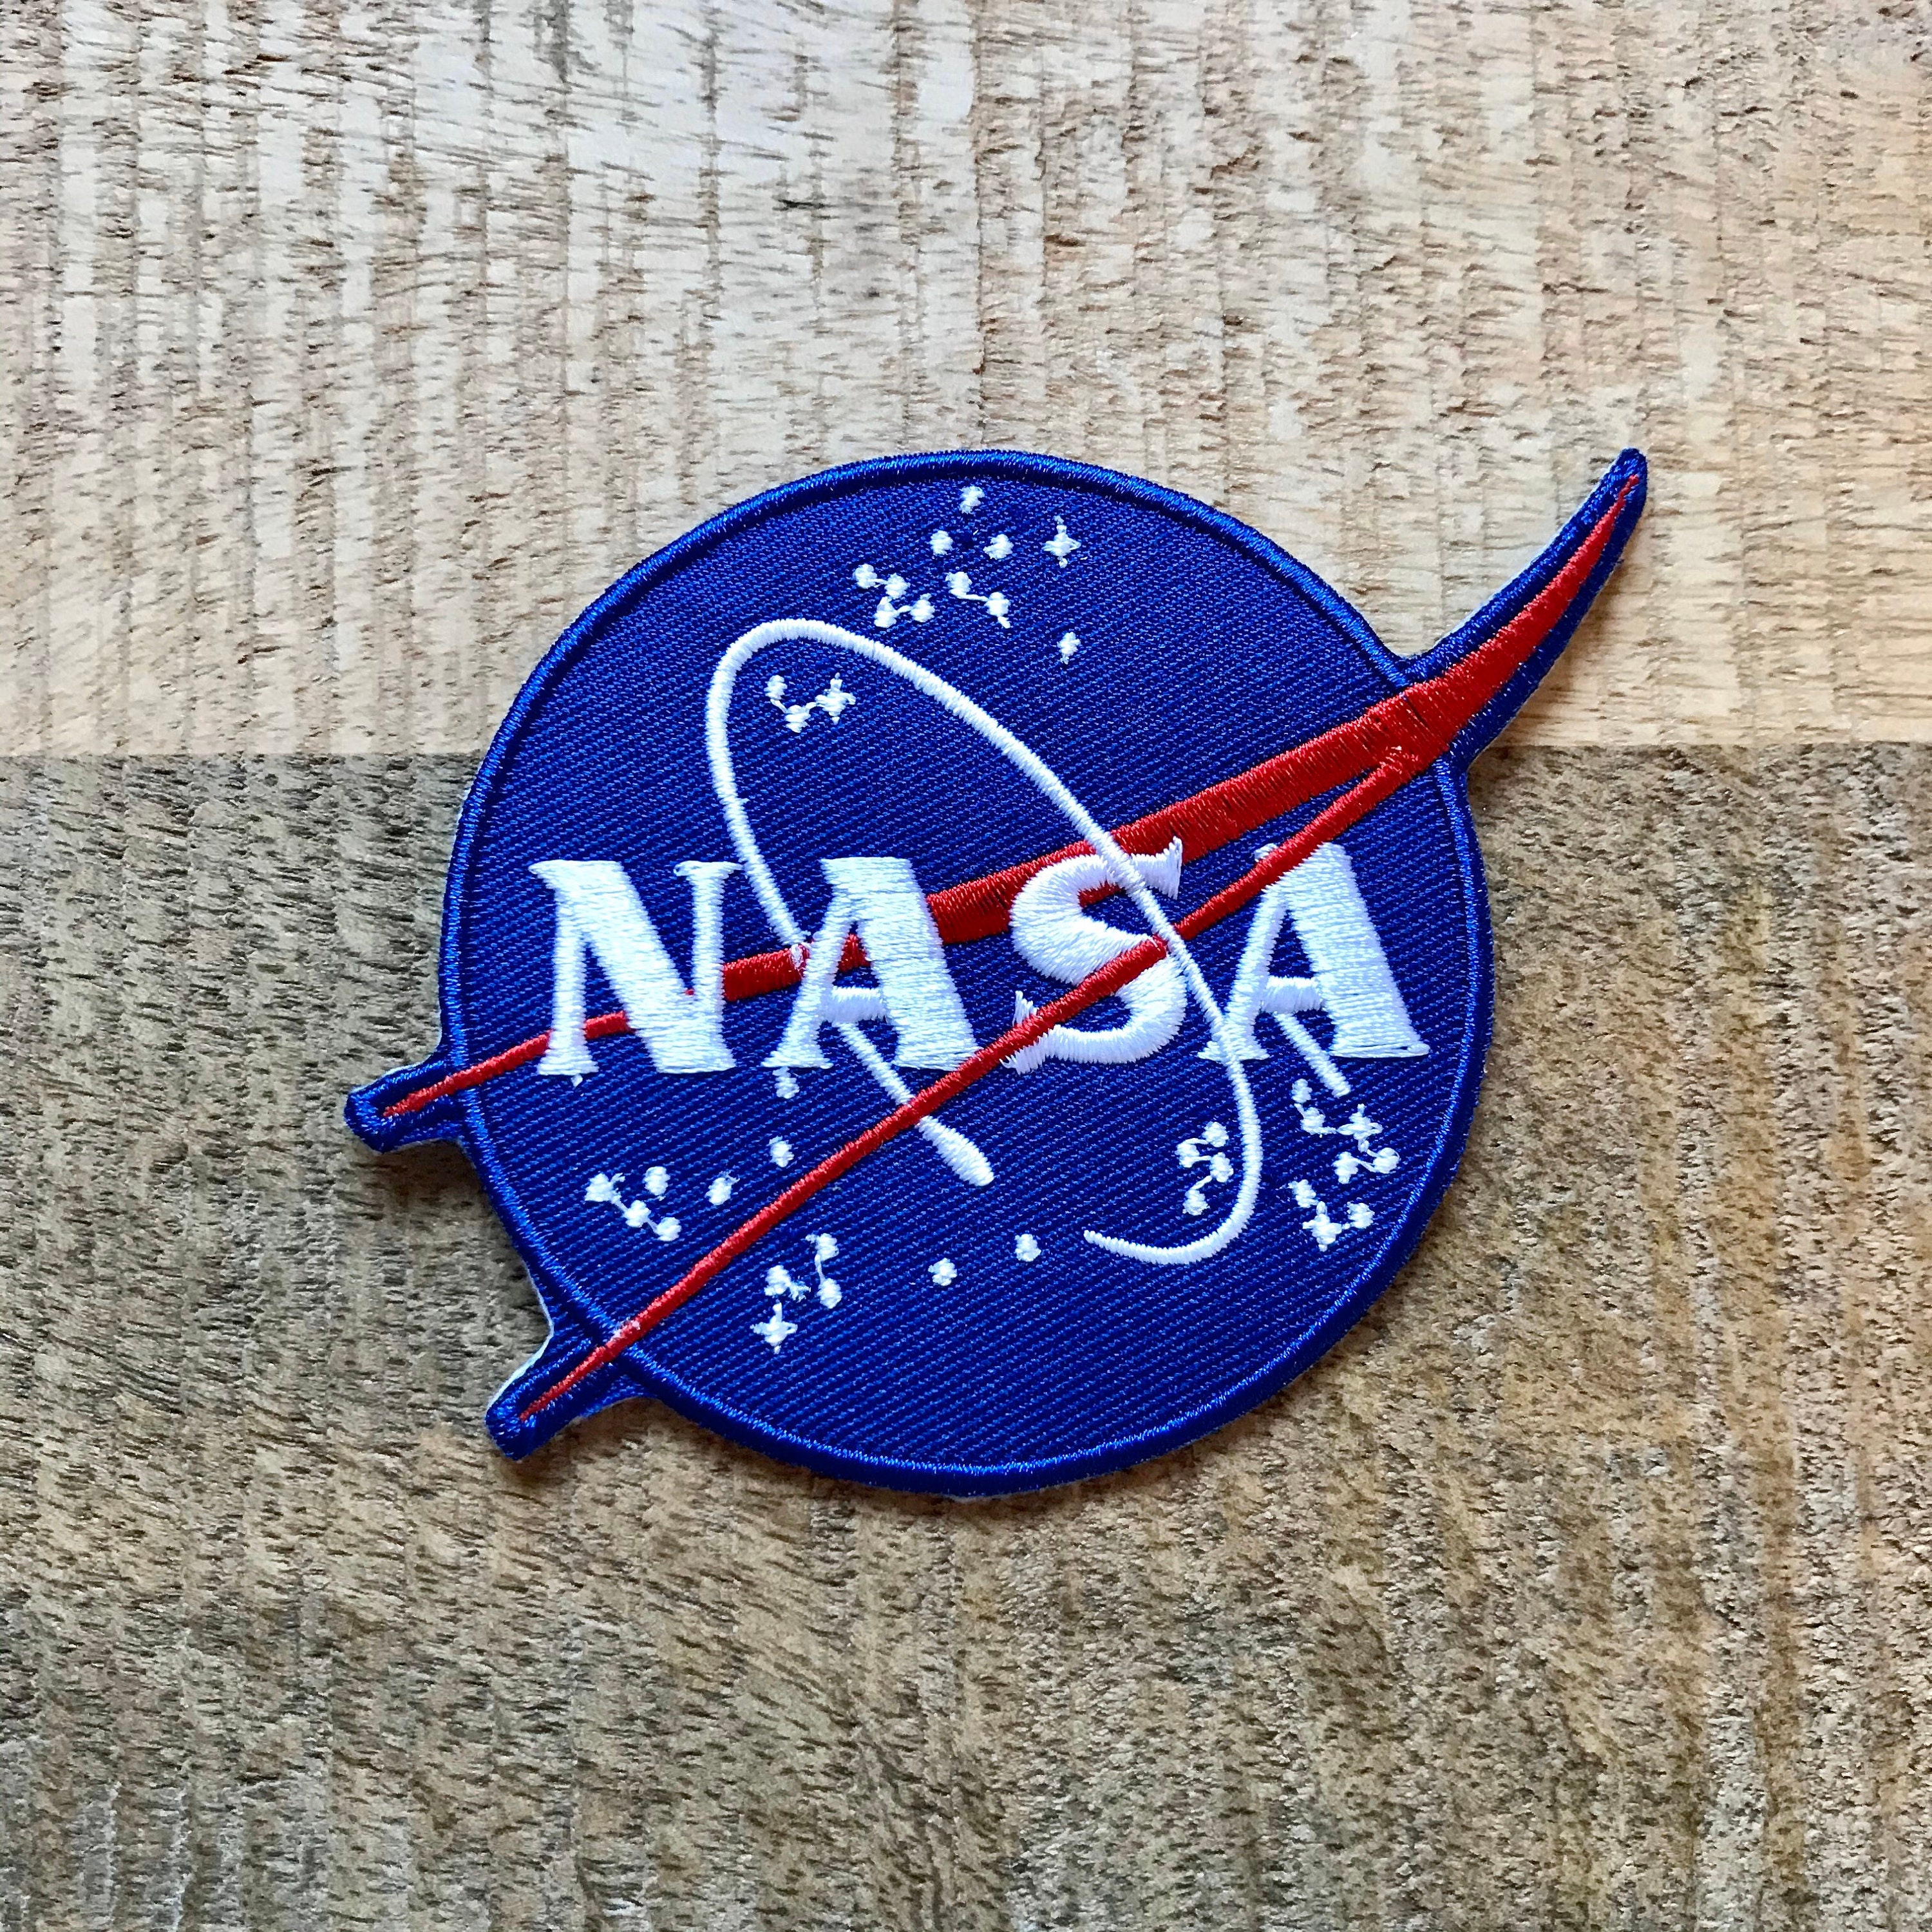 Sew On Embroidered Spaceman patches Shirt Badge Space Suit NASA Patch Iron 